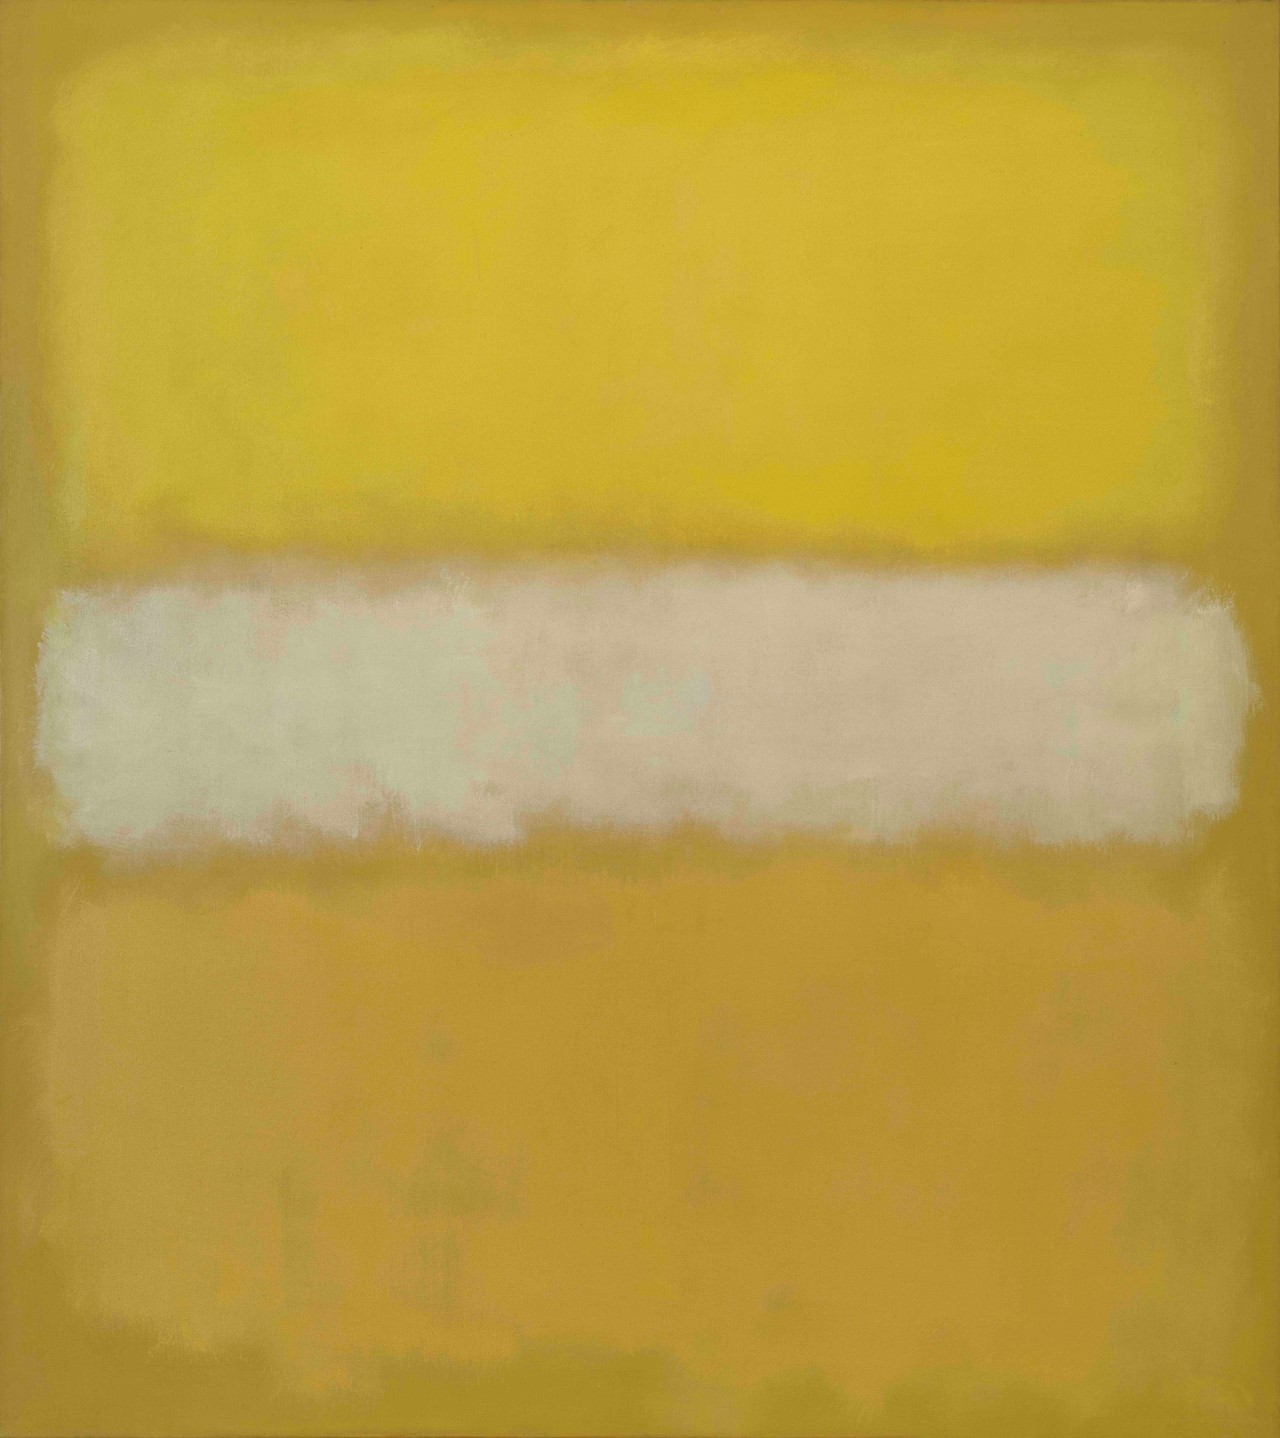 The Enduring Relevance of Rothko's Magnificent Abstract